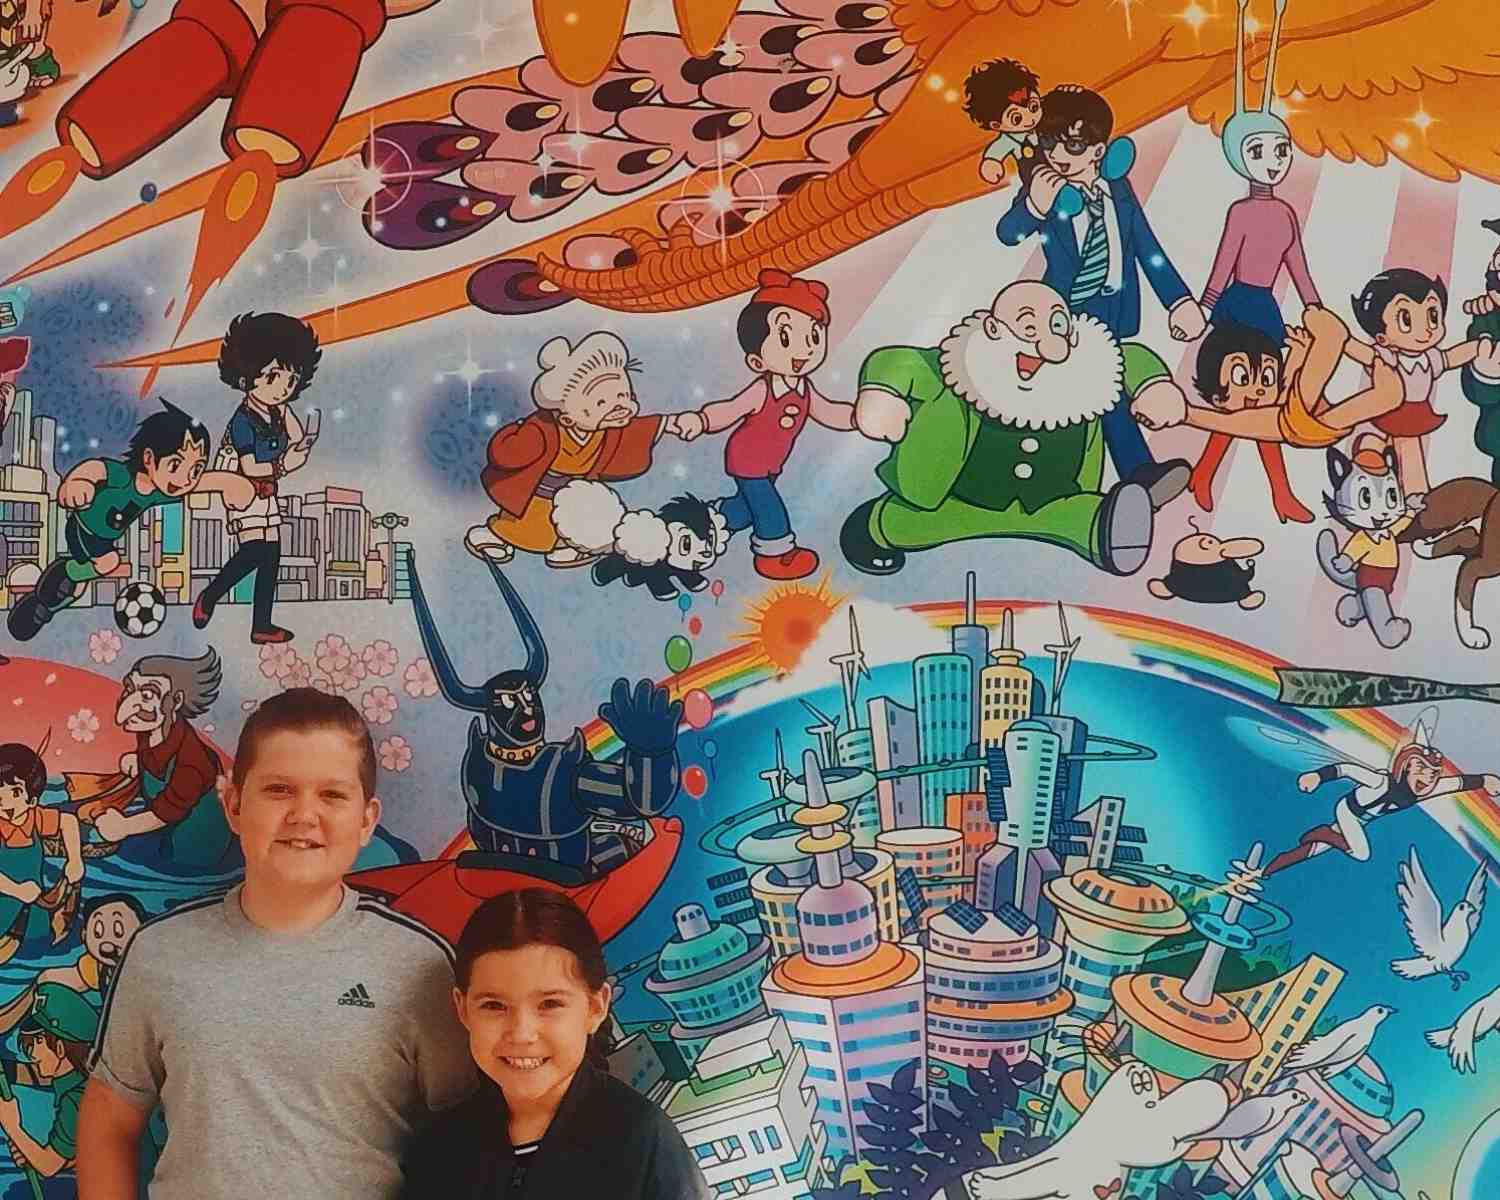 Finding all the pieces of the Astro Boy mural in Takadanobaba Japan